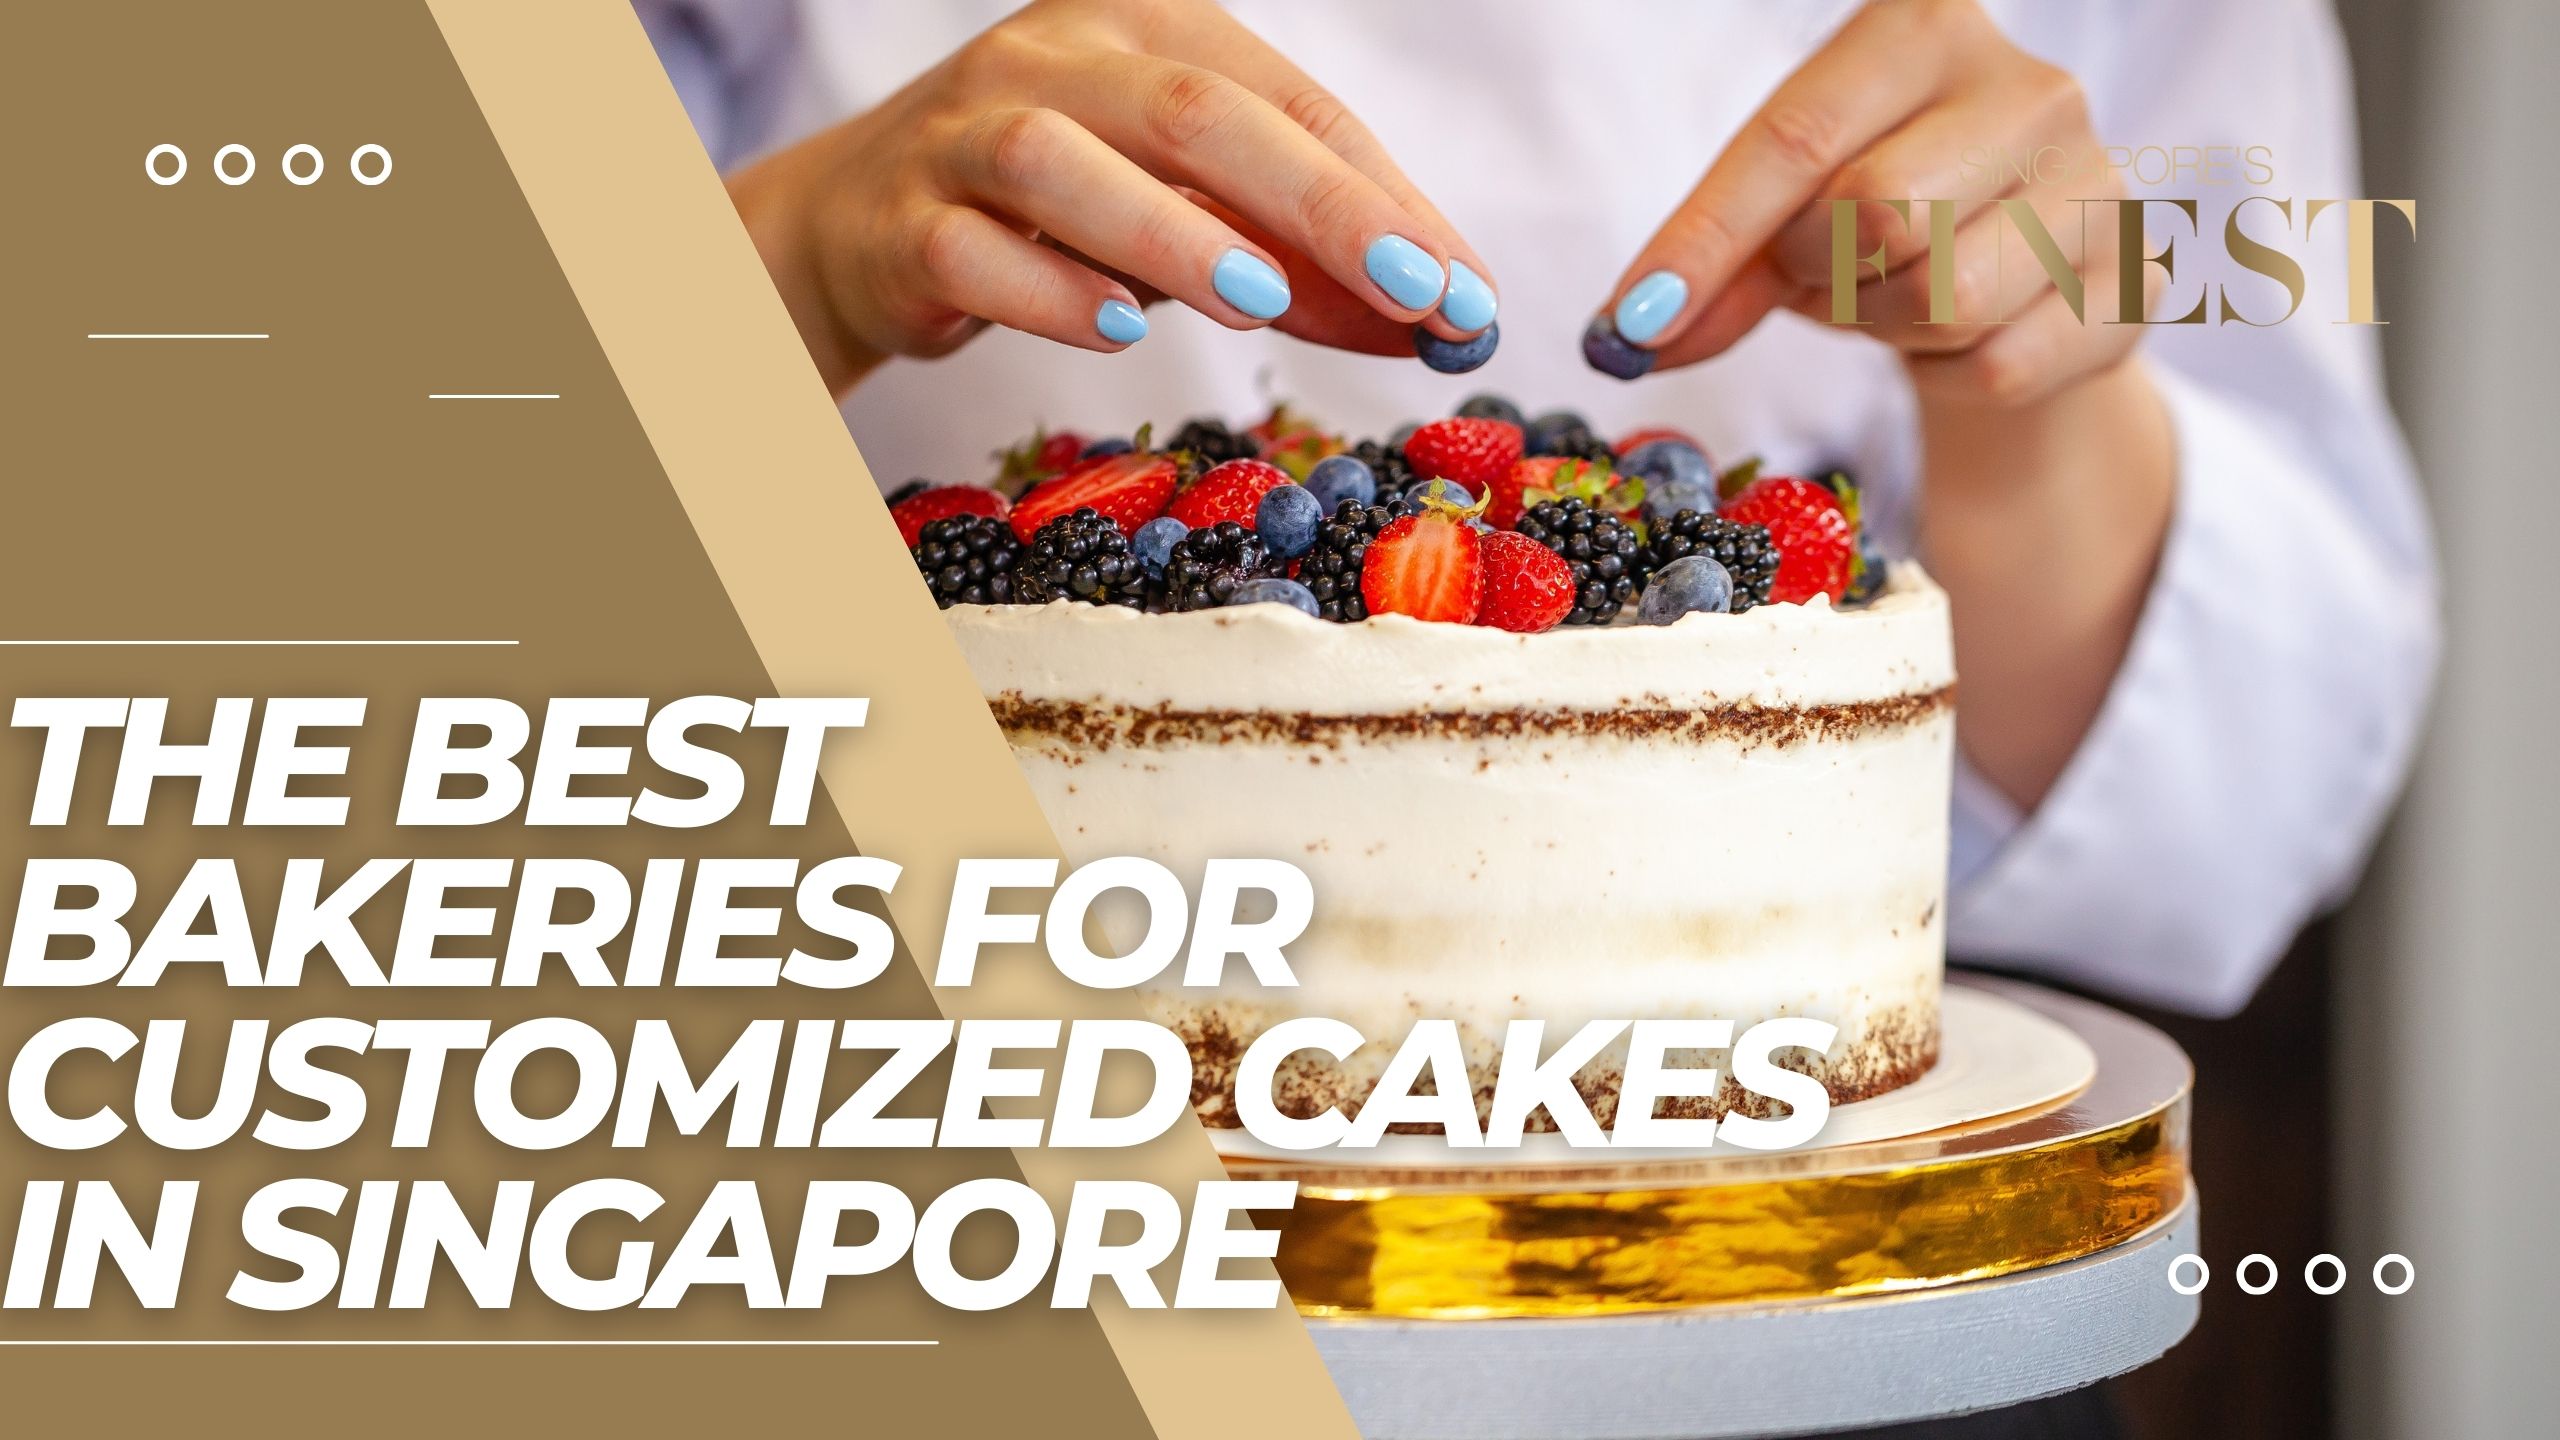 The Finest Bakeries for Customized Cakes in Singapore